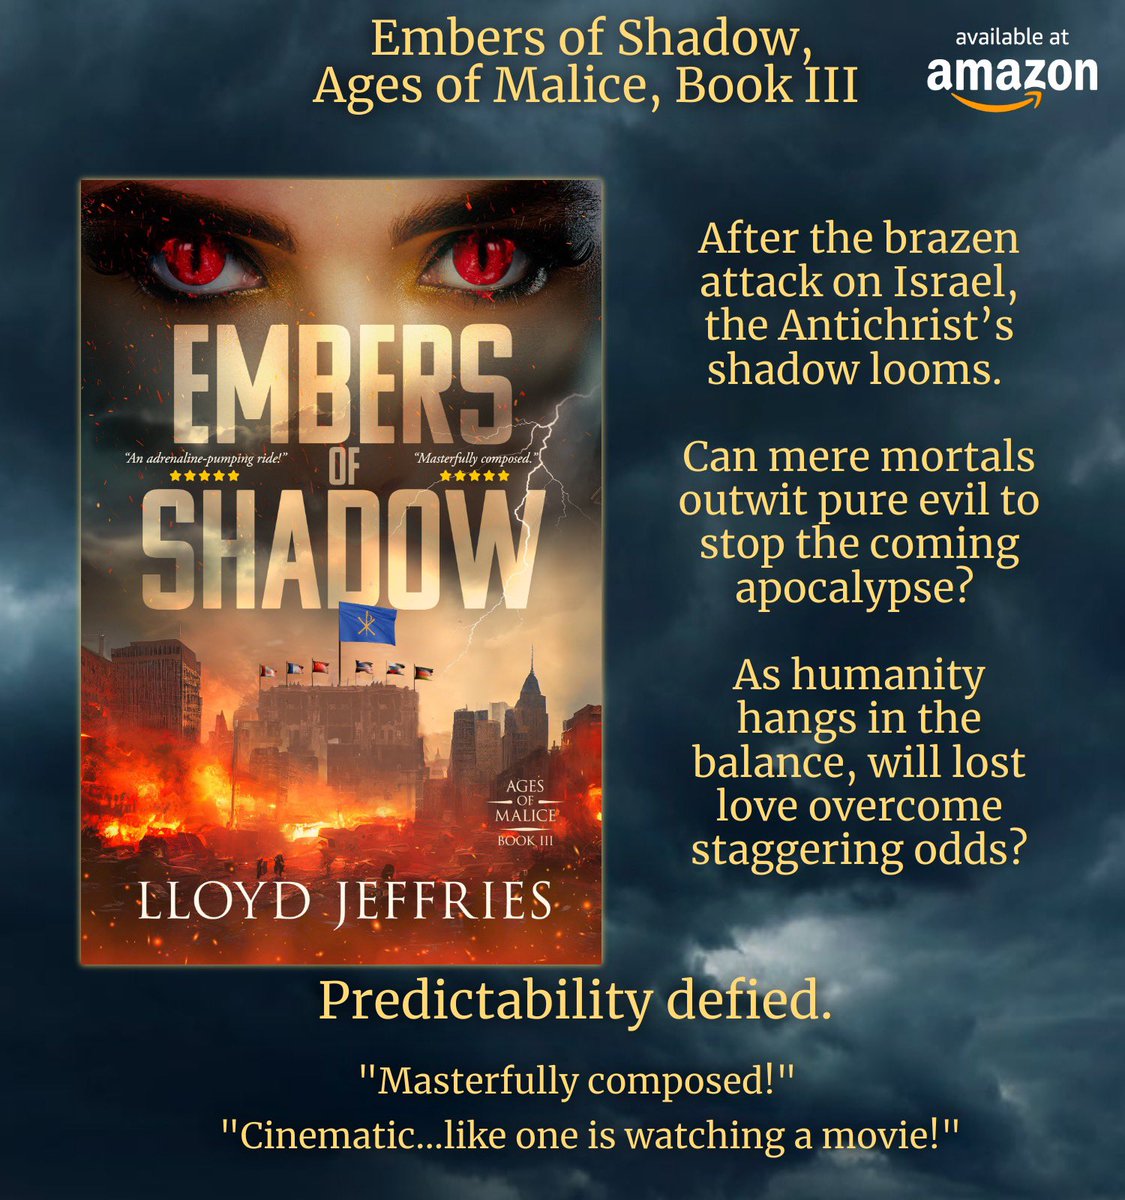 BookLife review,
Embers of Shadow, Lloyd Jeffries booklife.com/project/embers…

“Jeffries’ characters are deeply complex. The world building staggers”

“A scorching thriller of international terror and the Antichrist”
#Thrillers #bookaddict #Read
amazon.com/dp/B0BHXPDHYL